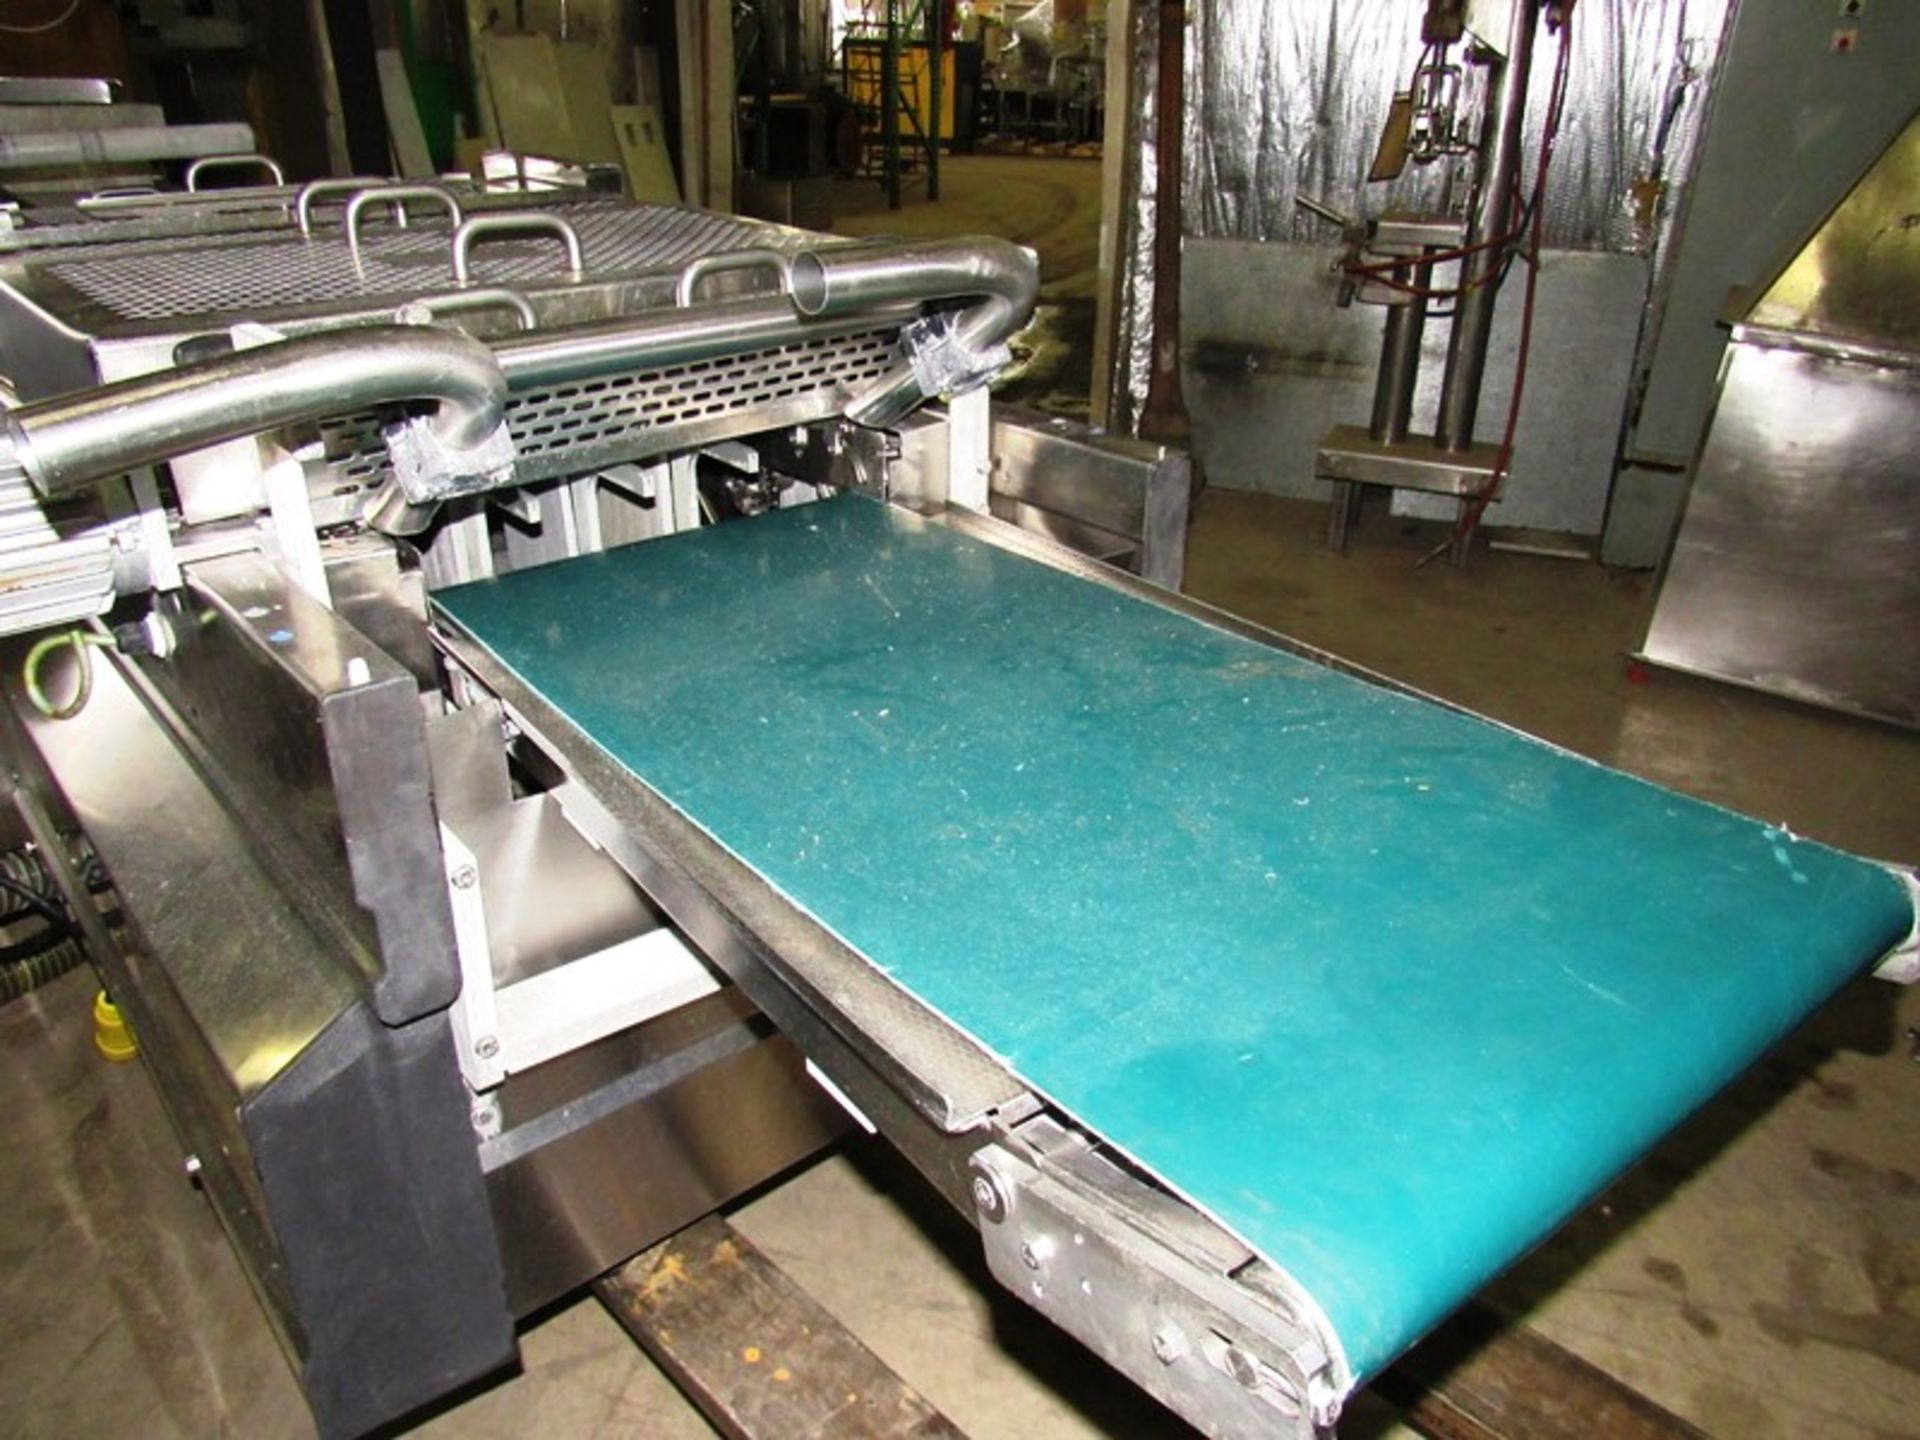 Multivac Mdl. R240 Rollstock Thermoforming Packager, Ser. #106852, approx. 450 mm between chains, - Image 19 of 31